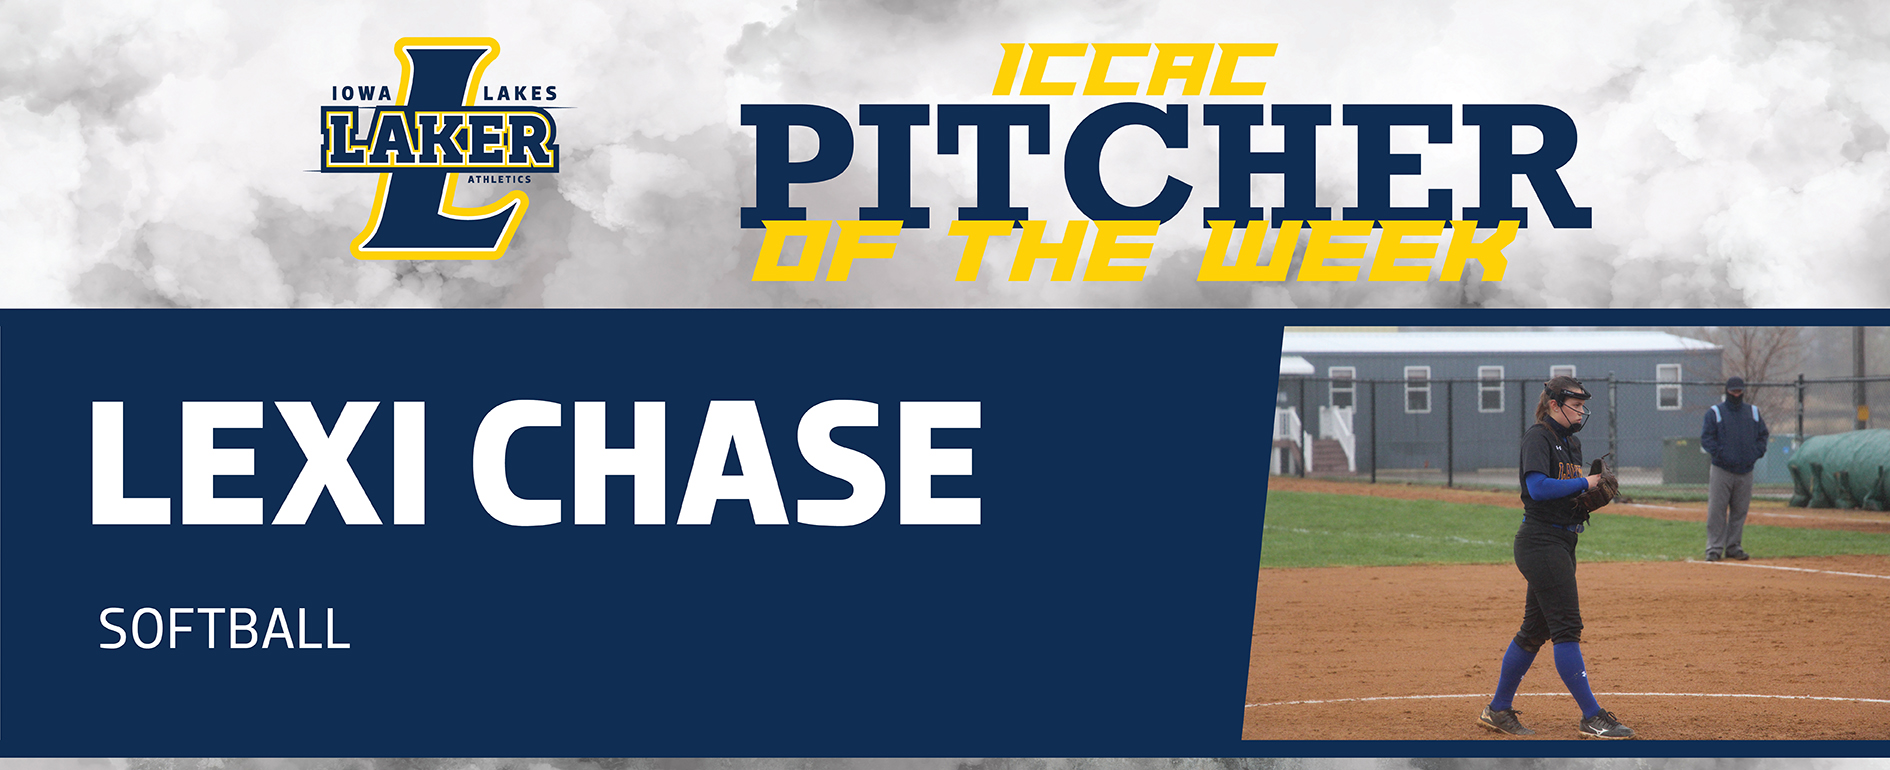 Chase Named Pitcher of the Week for Second Time in a Row